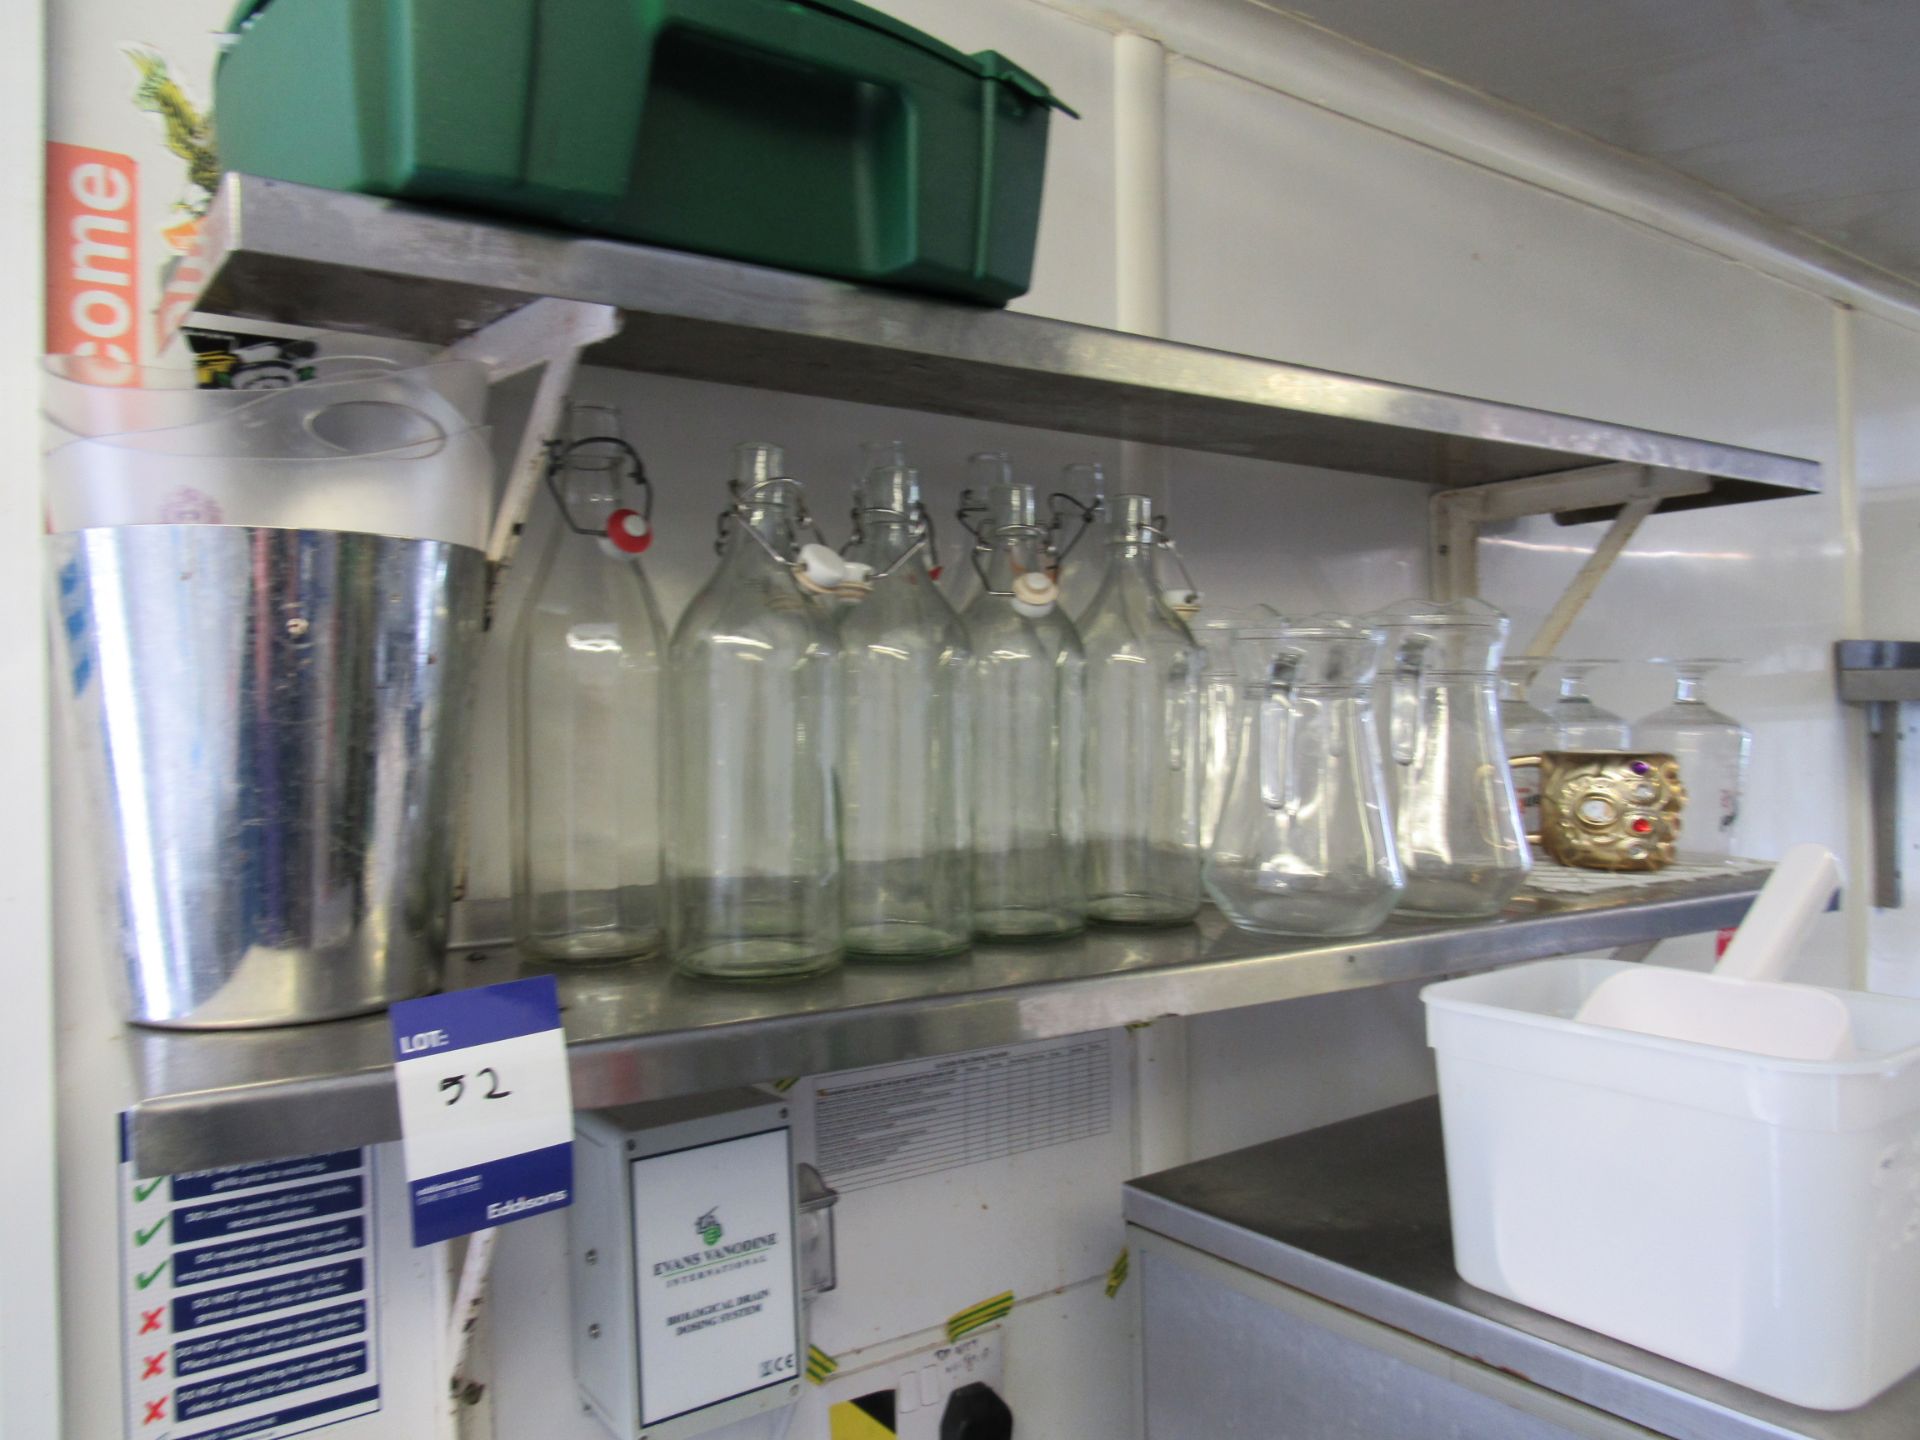 2 x Stainless steel shelves and contents of bottles and jugs